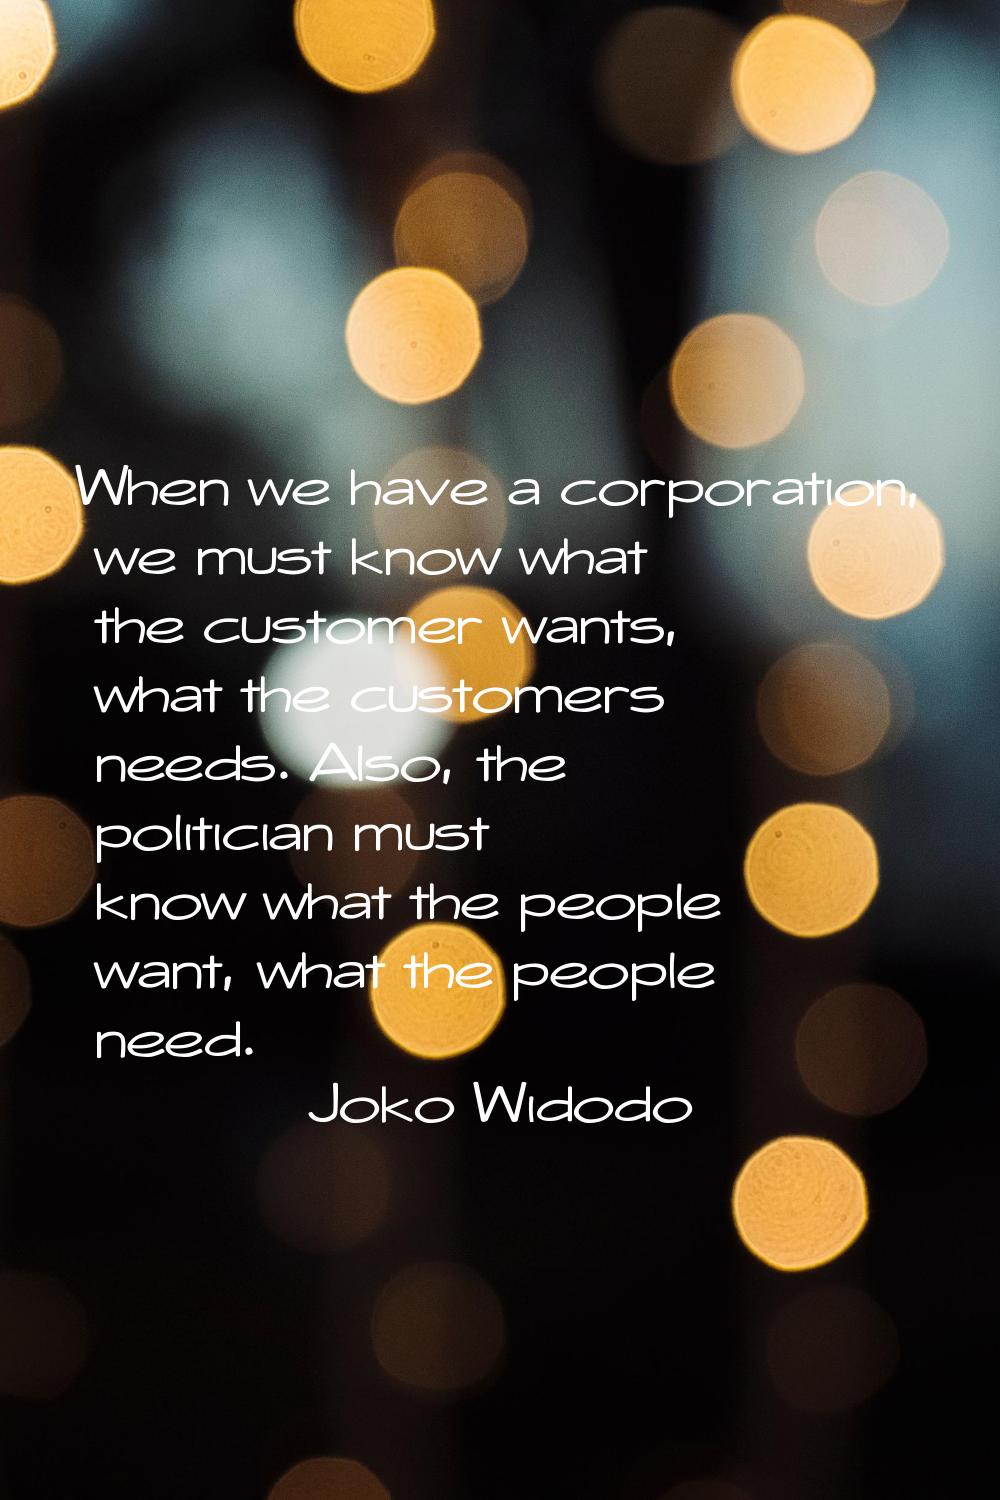 When we have a corporation, we must know what the customer wants, what the customers needs. Also, t